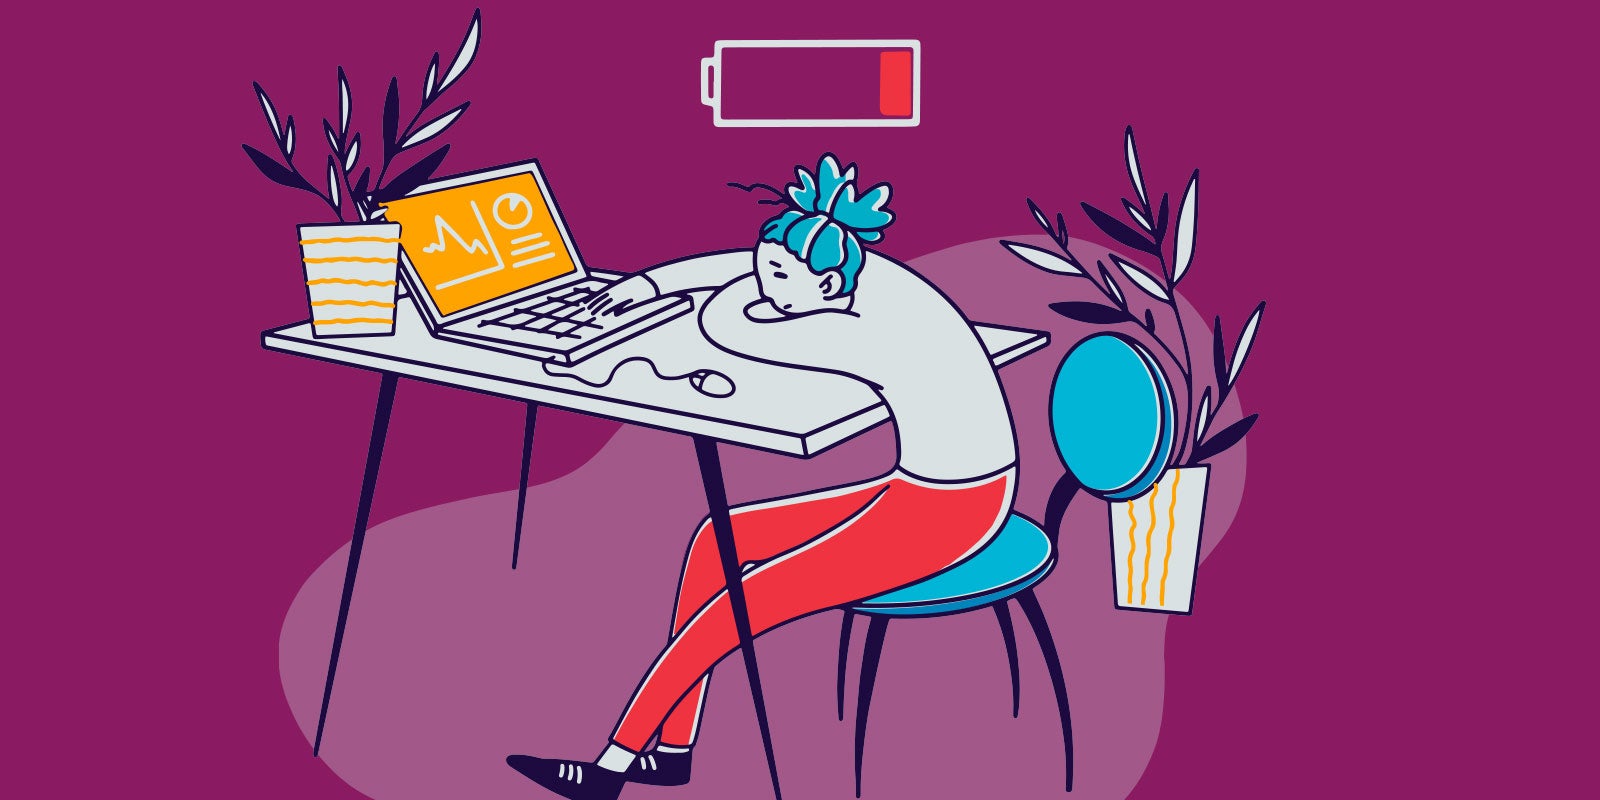 animated image of a woman working on her laptop, looking deflated, showing this blog is about signs of low employee engagement